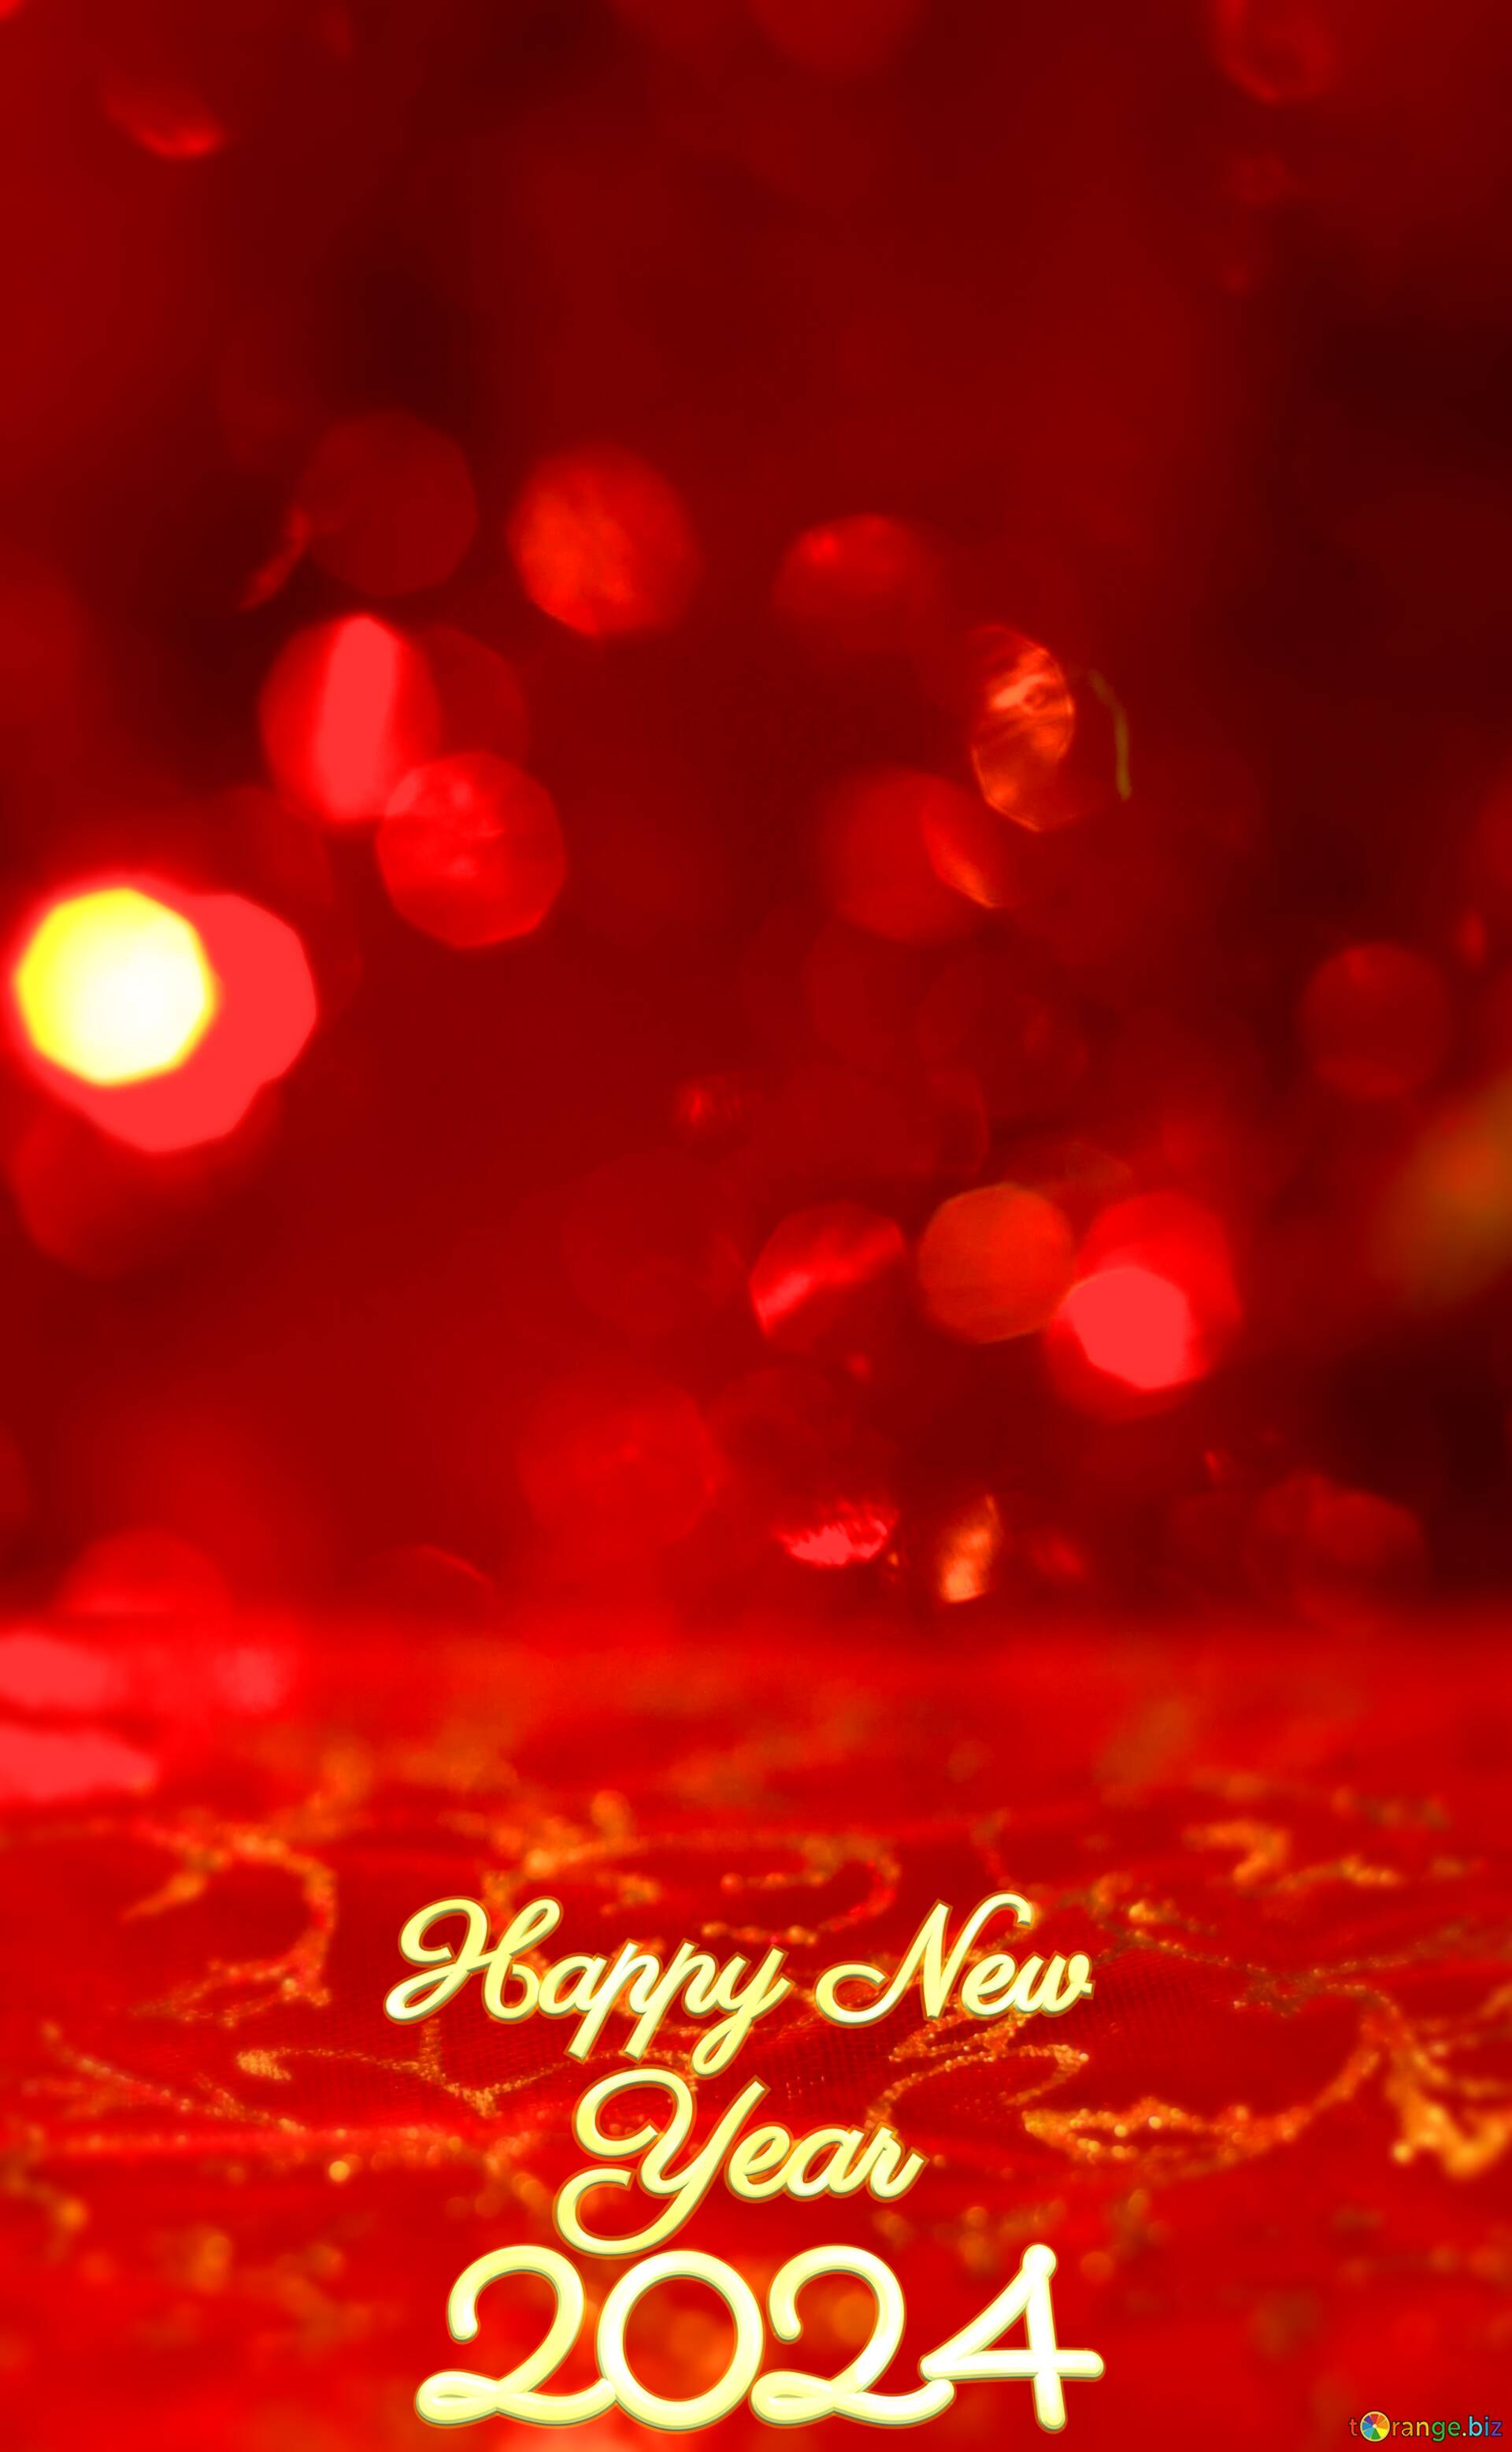 Download free picture Christmas background happy new year 2022 red lights  on CC-BY License ~ Free Image Stock  ~ fx №58300